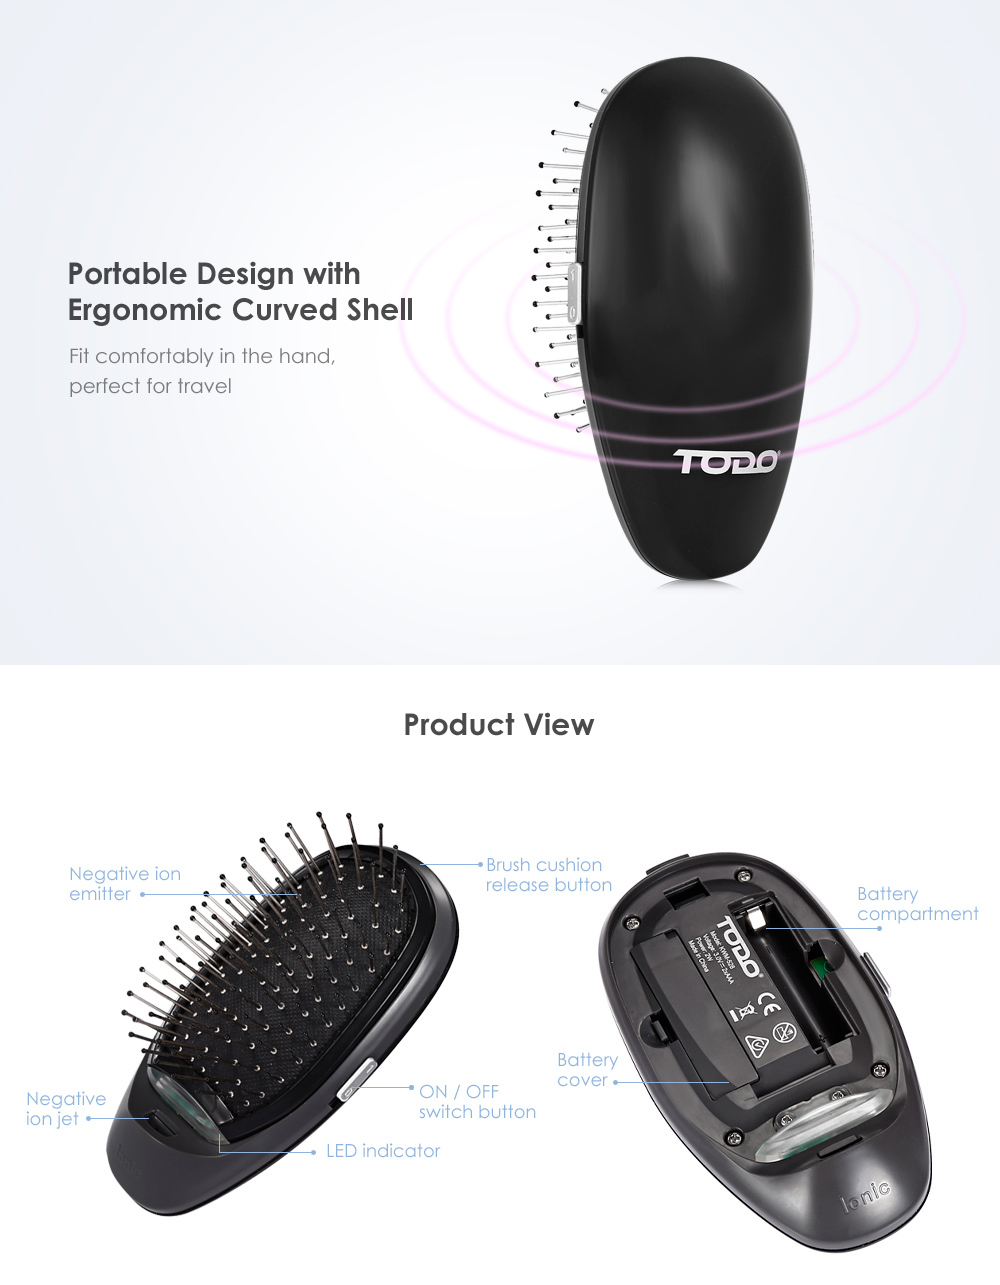 TODO KWM - 528 Ionic Styling Cushion Brush Portable Hair Straighter Beauty Care Fashion Salon Comb